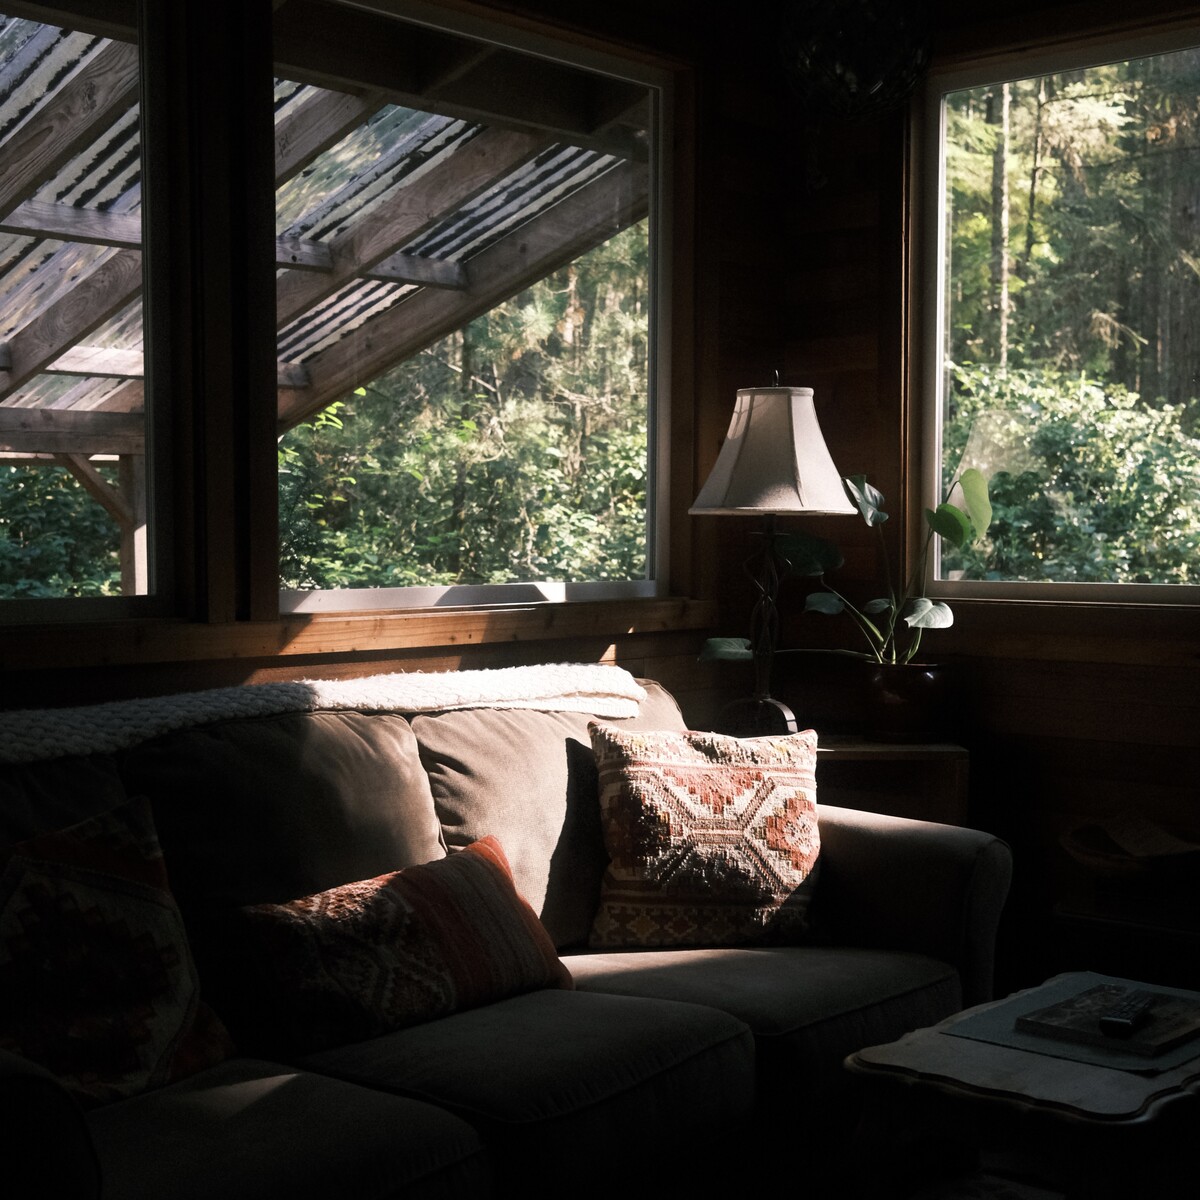 A photo from inside a cabin with greenery in the background.